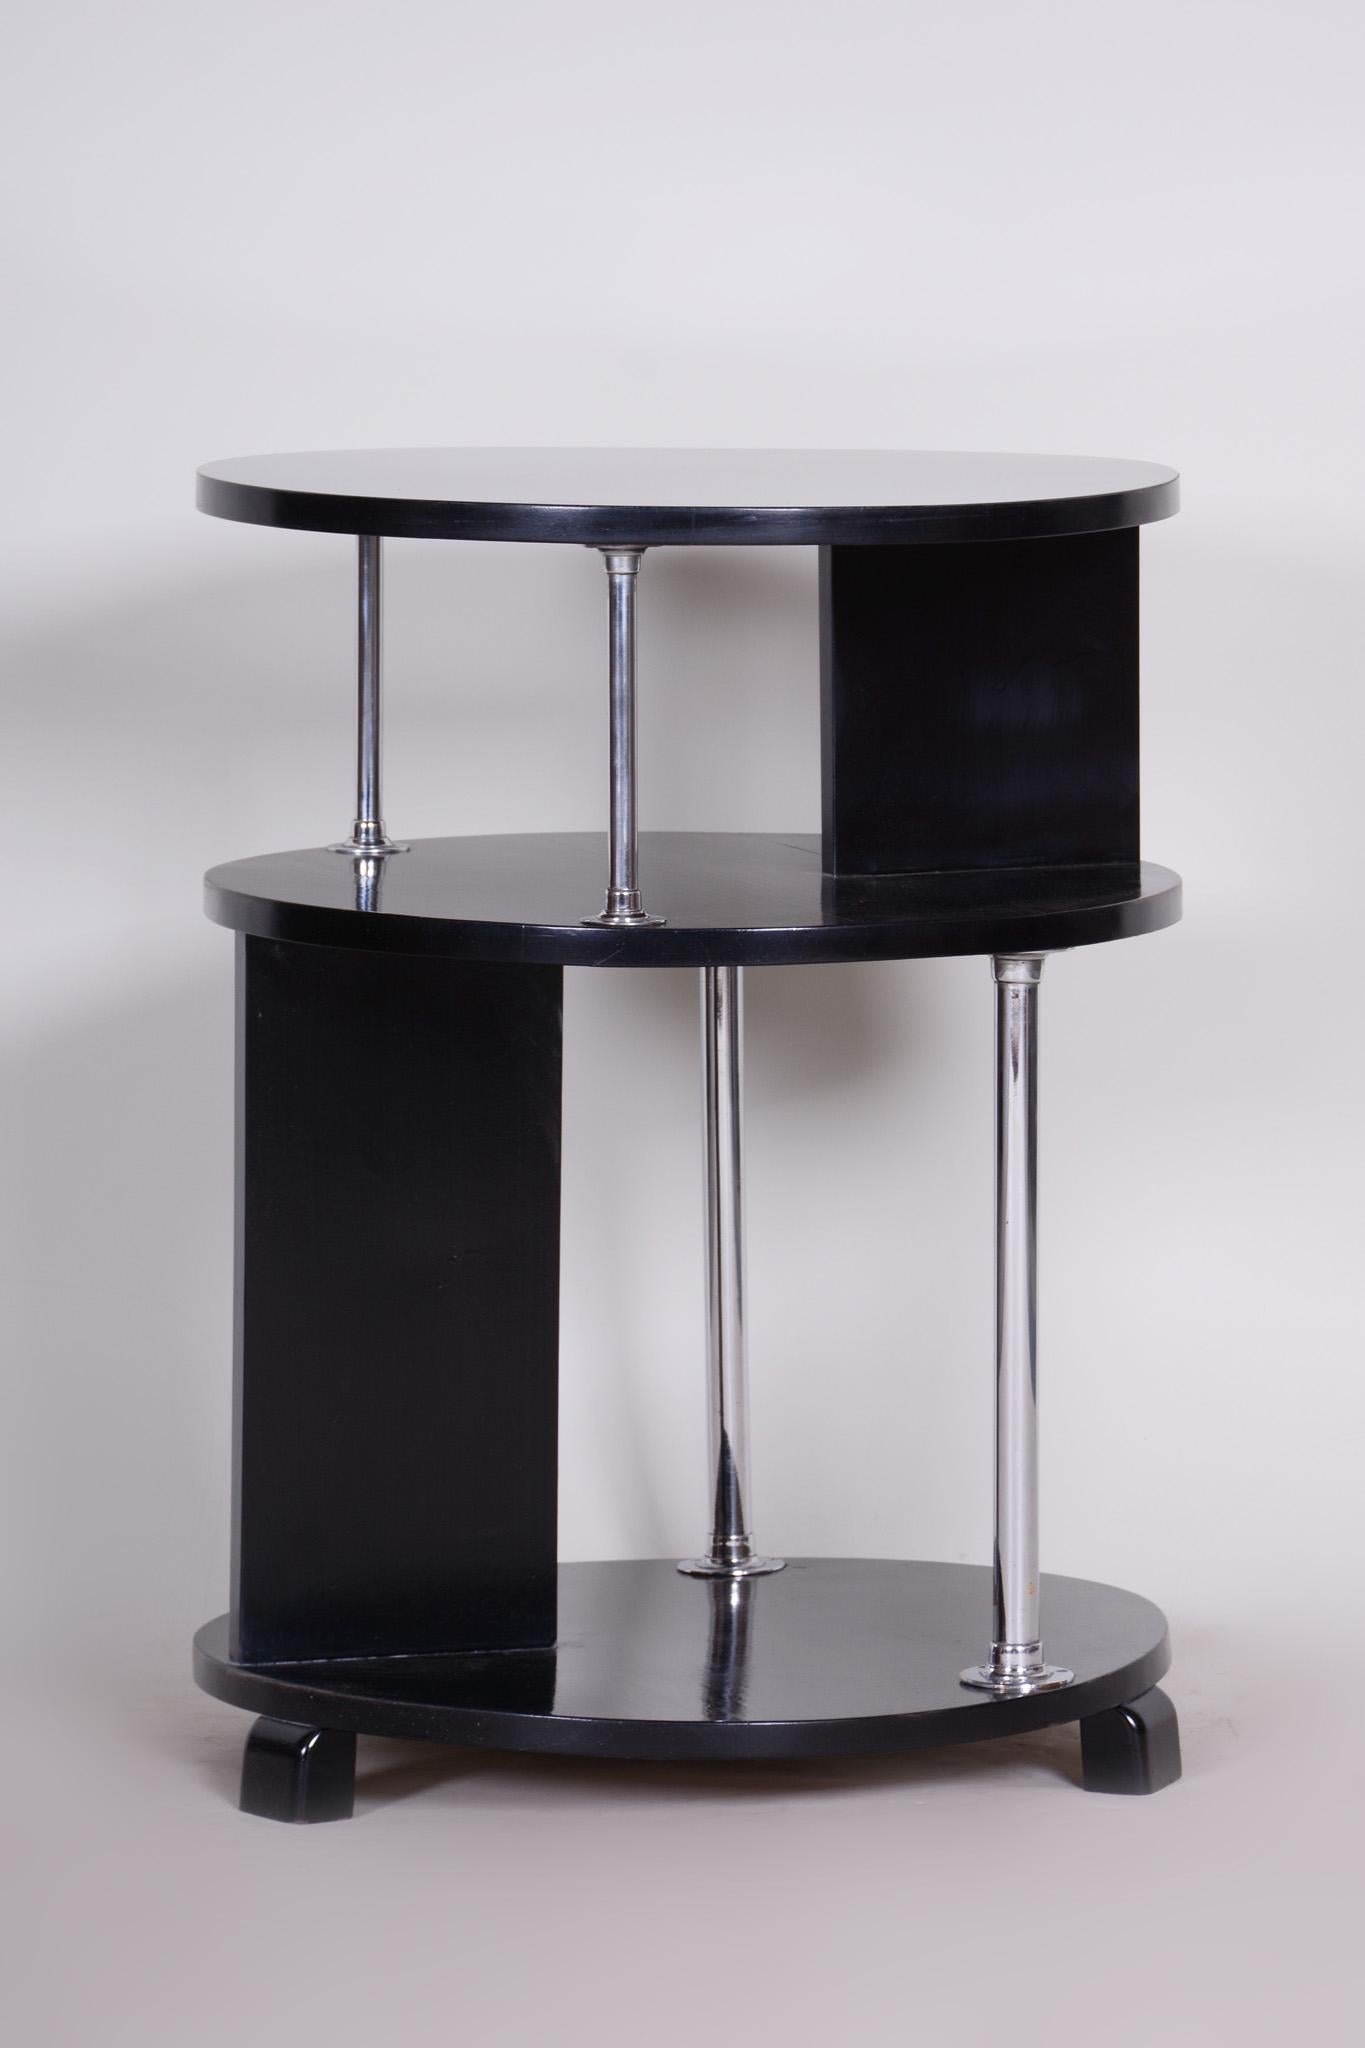 Small Czech chrome Bauhaus table.
Material: Chrome-plated steel and beech
Period: 1930-1939
Source: Czechia.